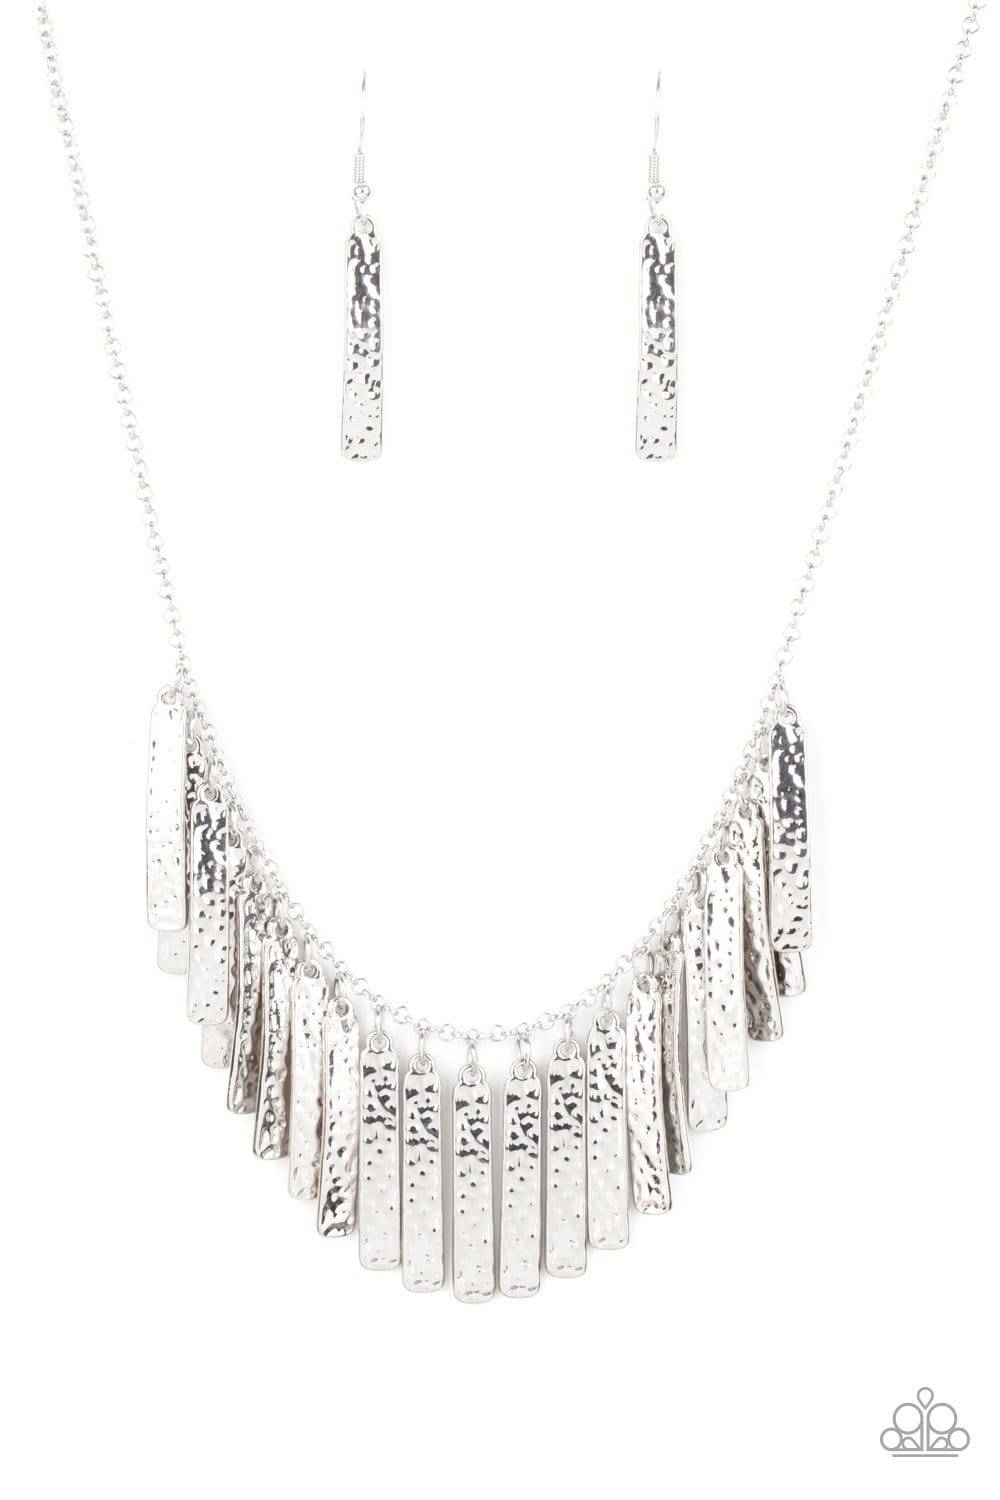 A159 - Metallic Muse - Silver Necklace by Paparazzi Accessories on Fancy5Fashion.com